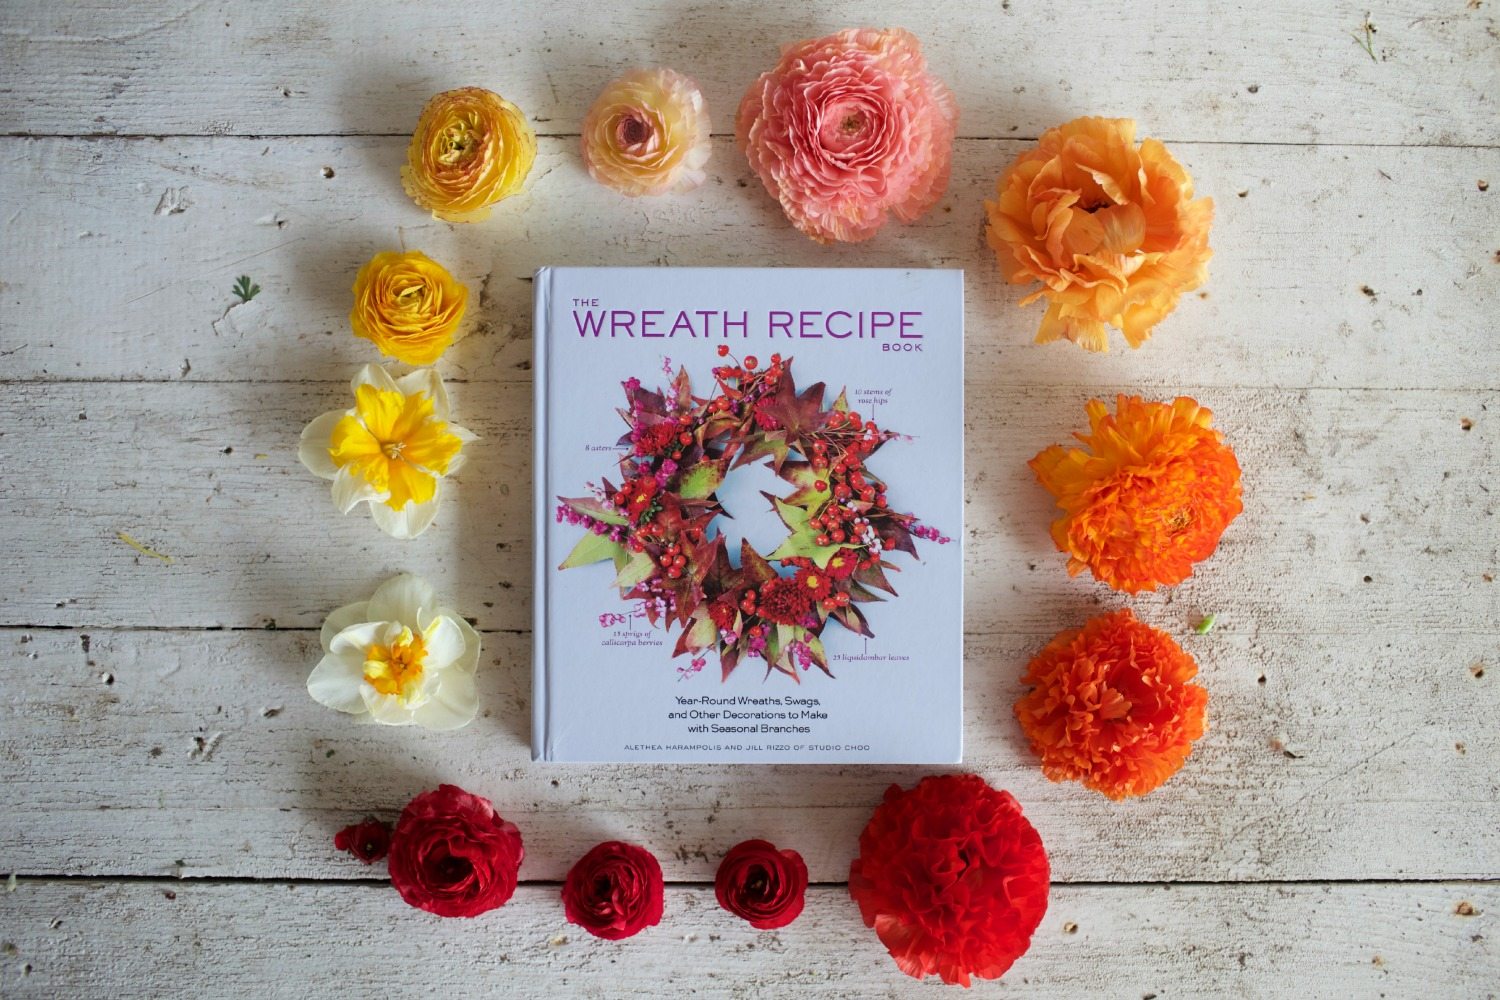 The Wreath Recipe Book surrounded by flowers